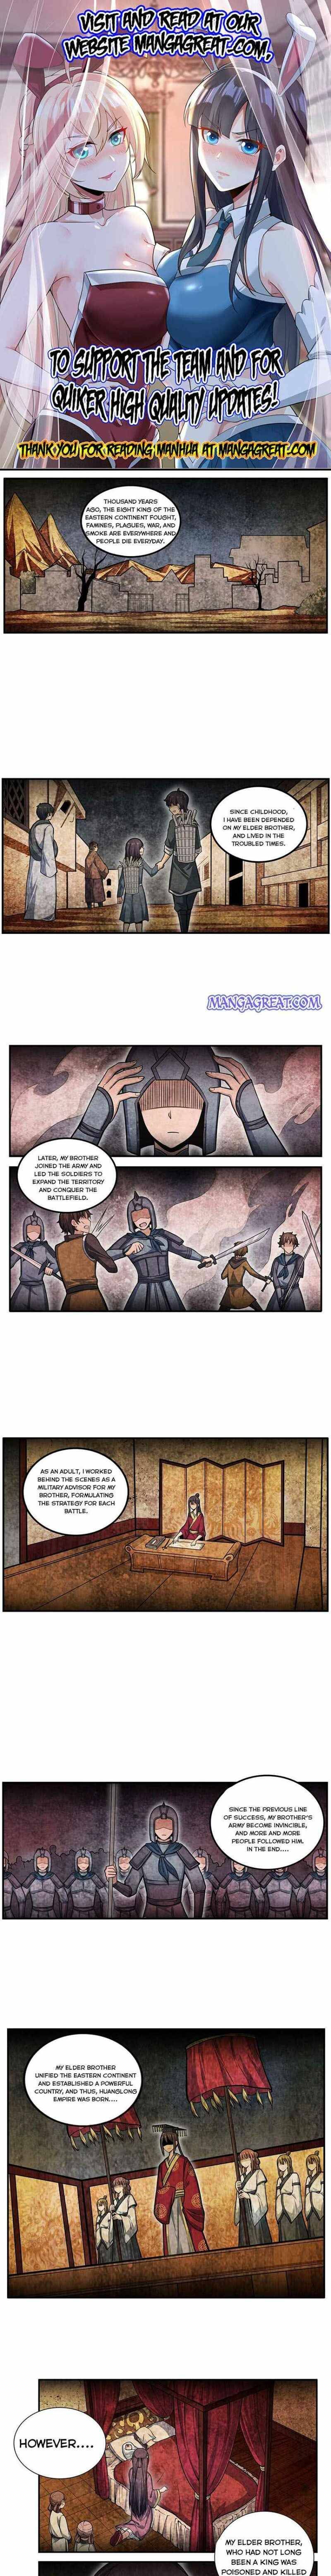 Infinite Apostles and Twelve War Girls Chapter 201 page 1